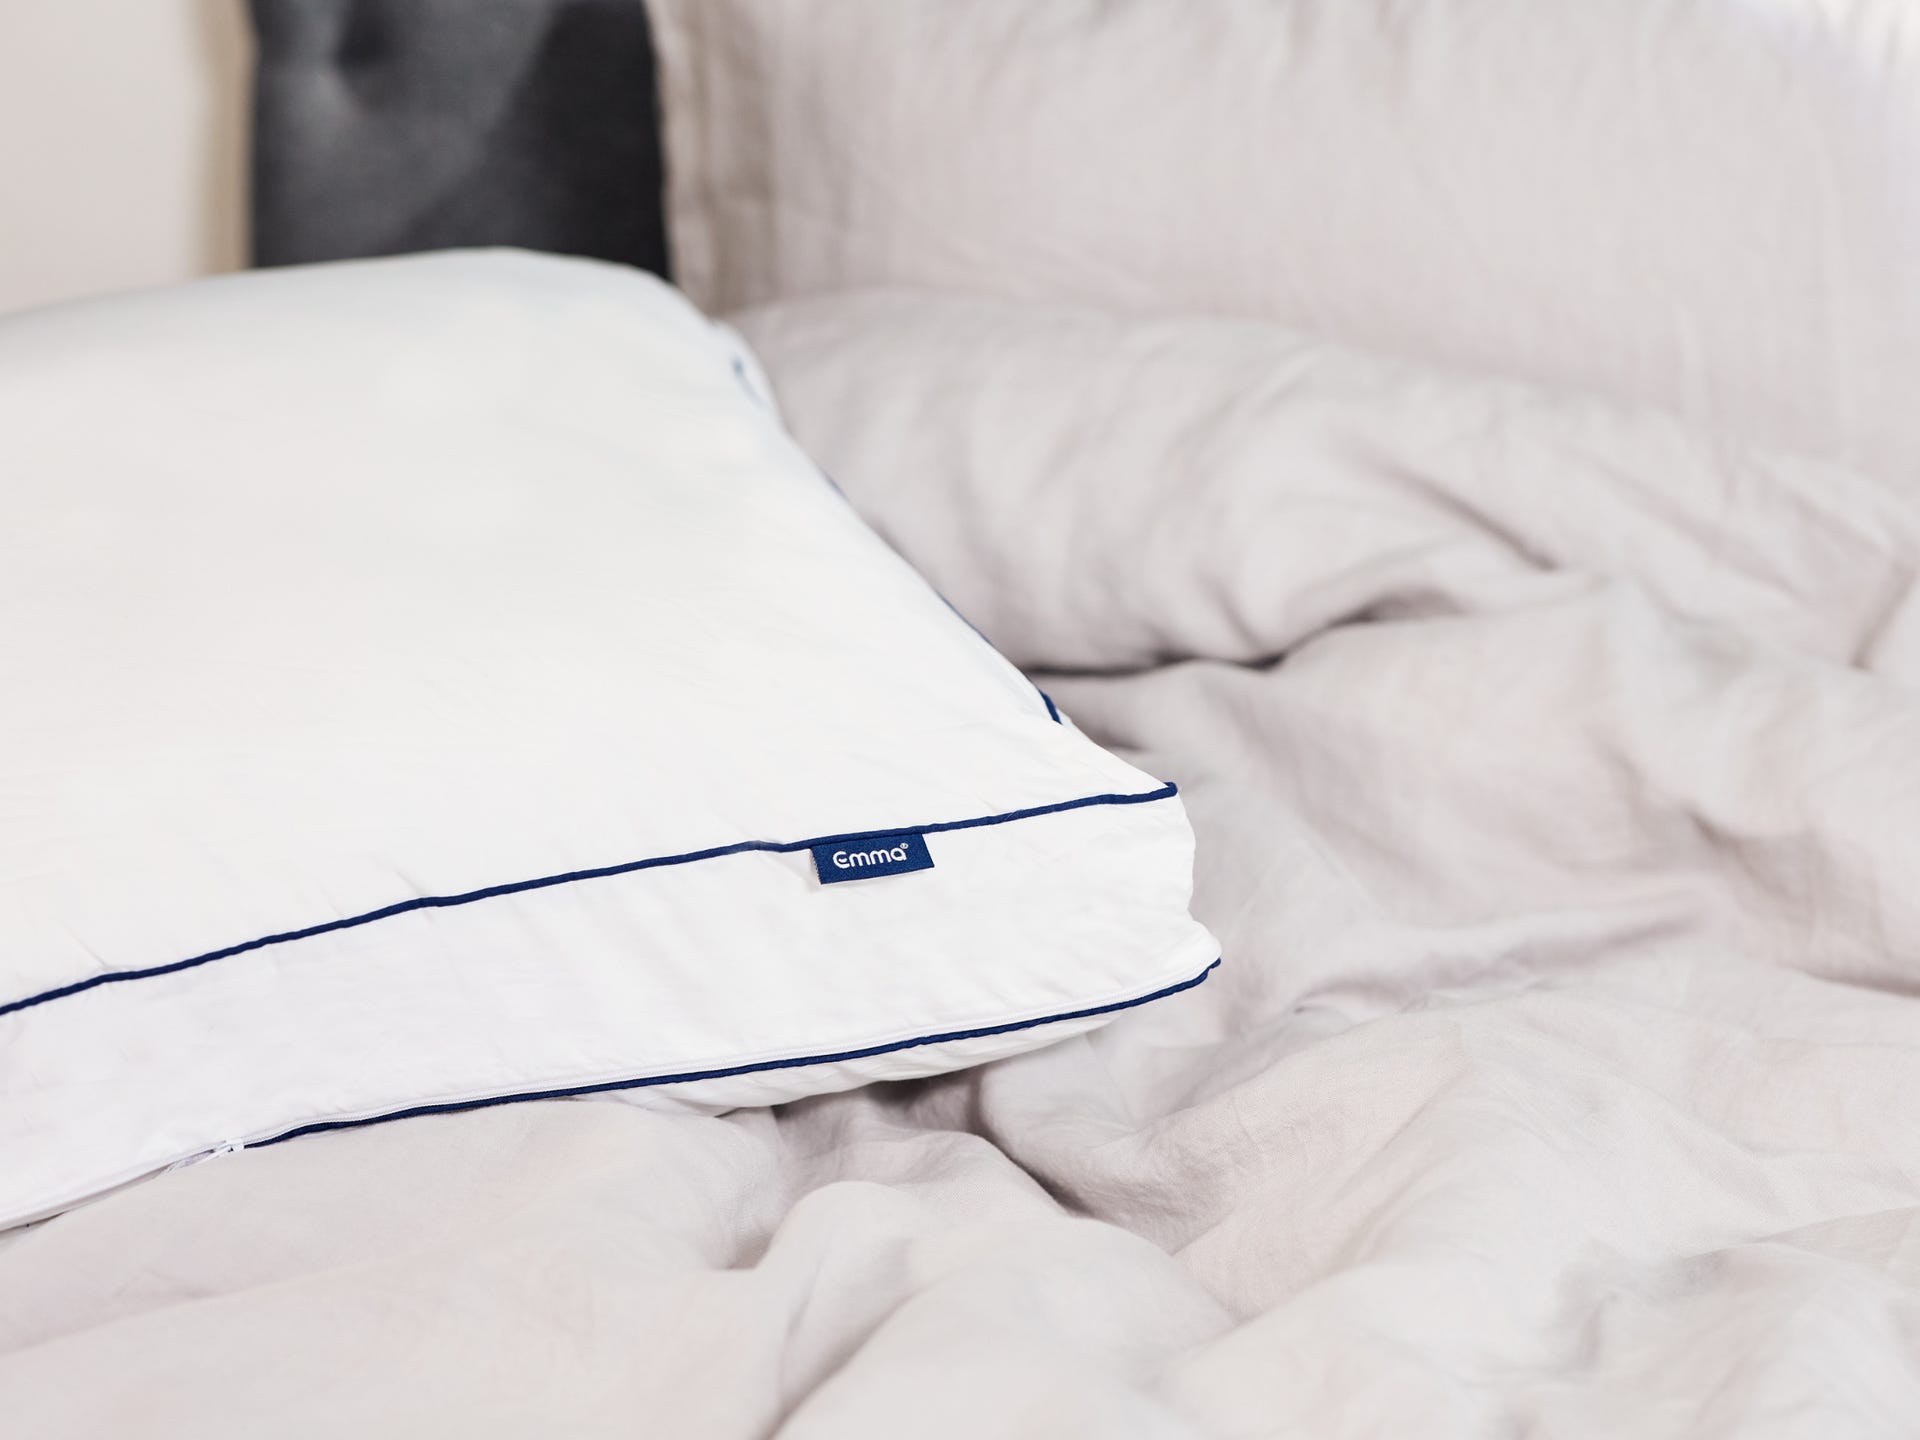 Emma Soft Microfibre Pillow - ideal for your bedroom set.